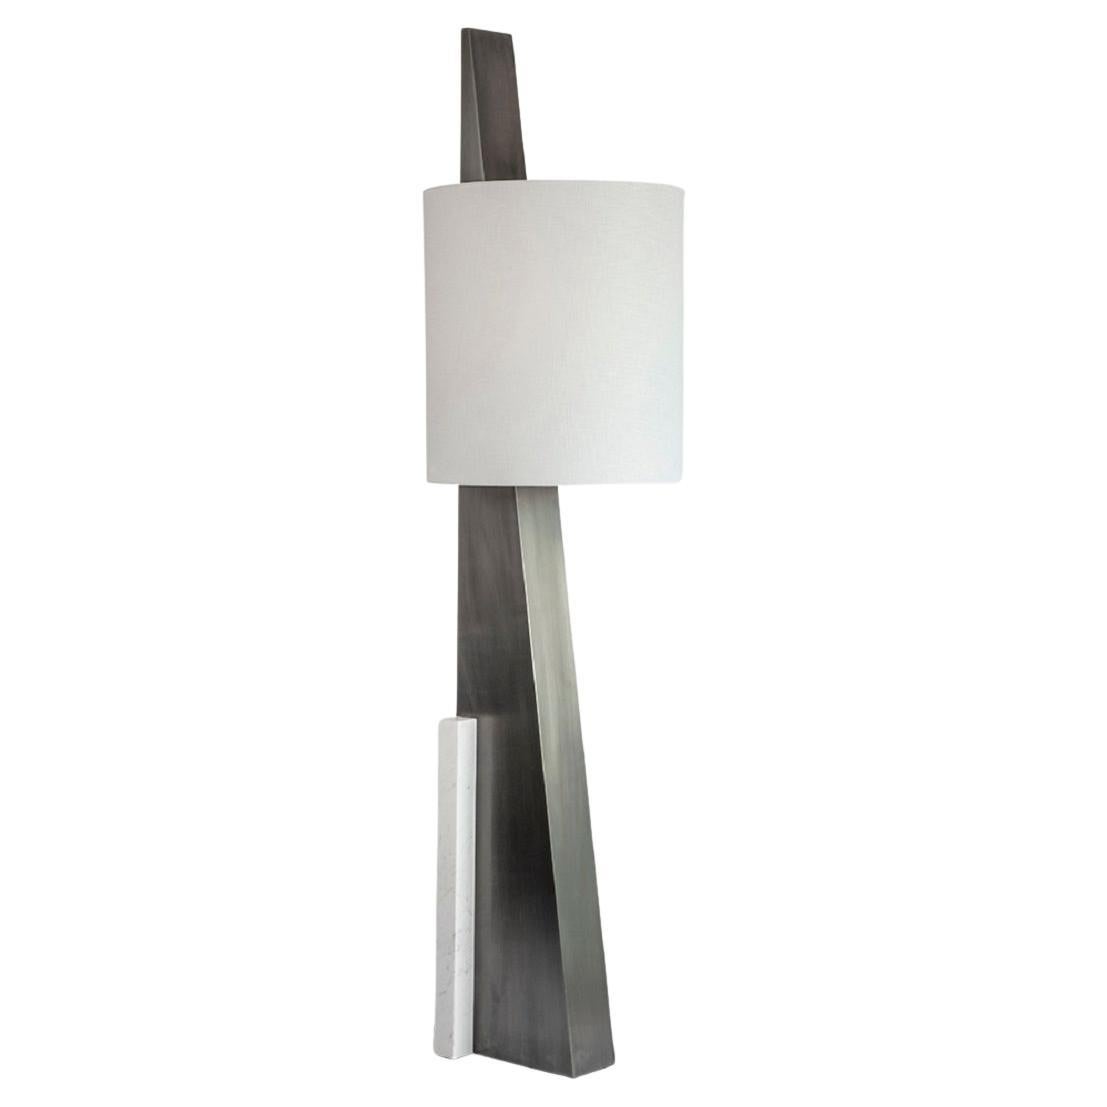 Marble Cut Triangle II Table Lamp by Square in Circle